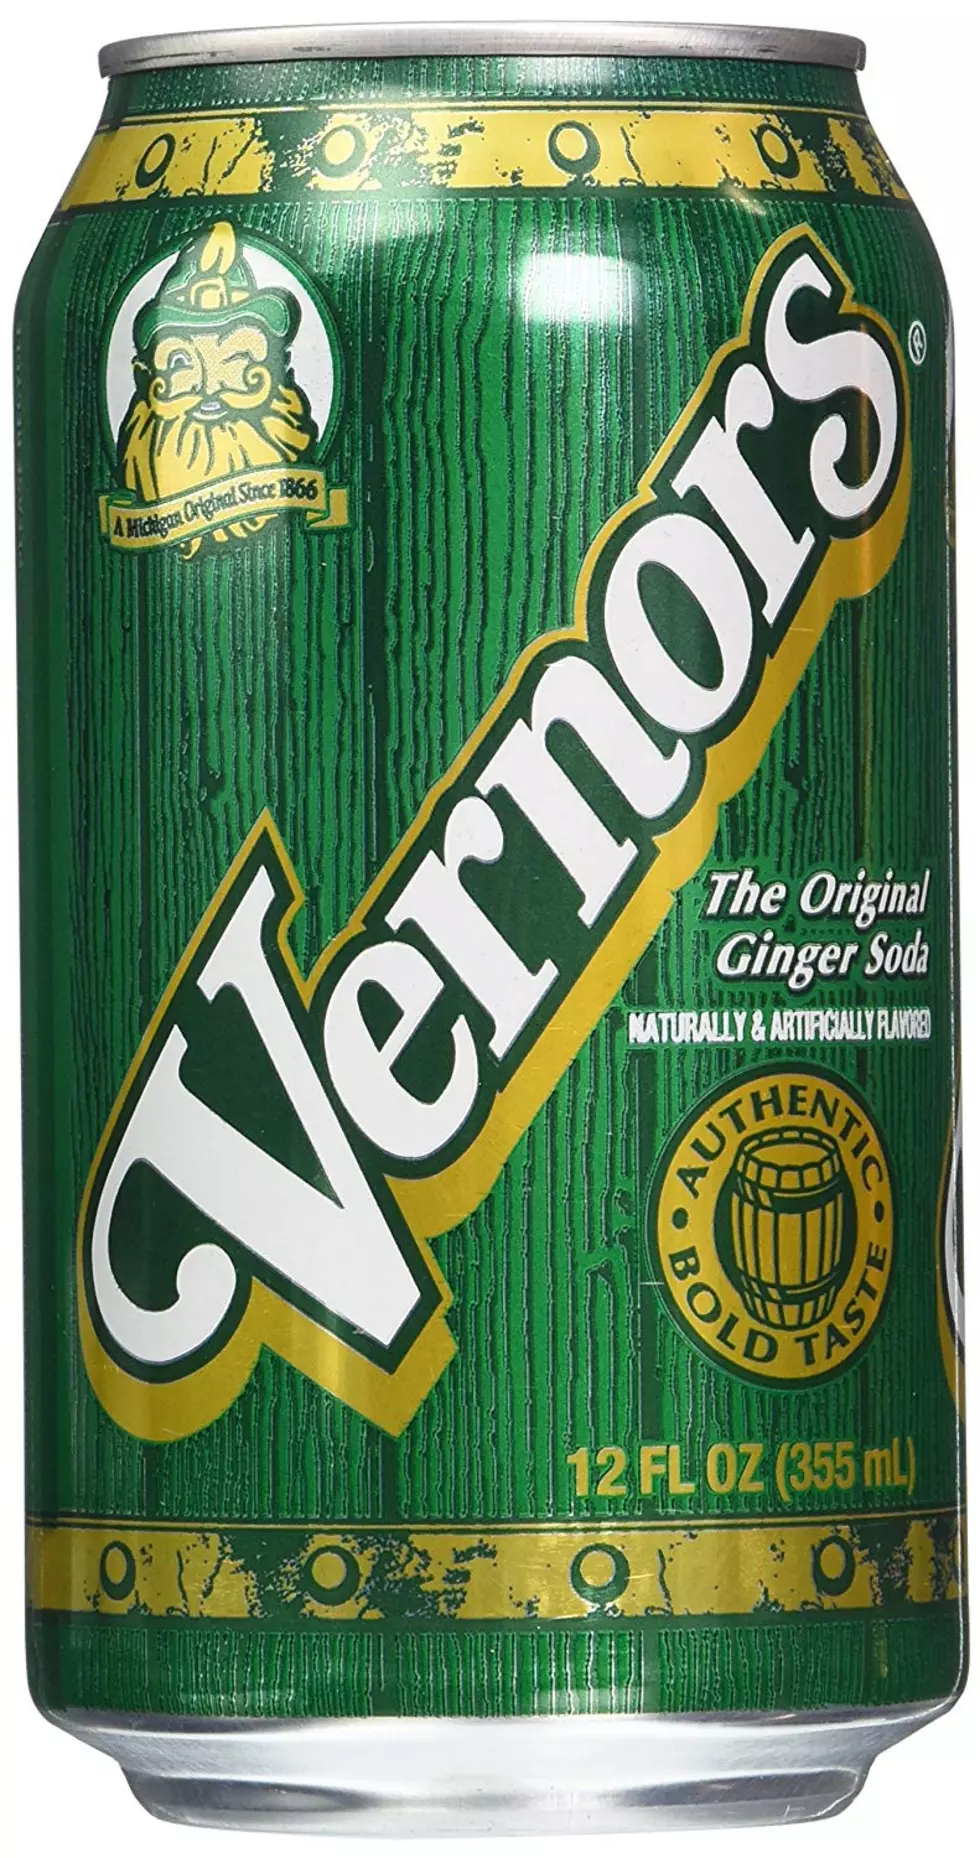 How & Why Is Vernors A Michigan Cure All